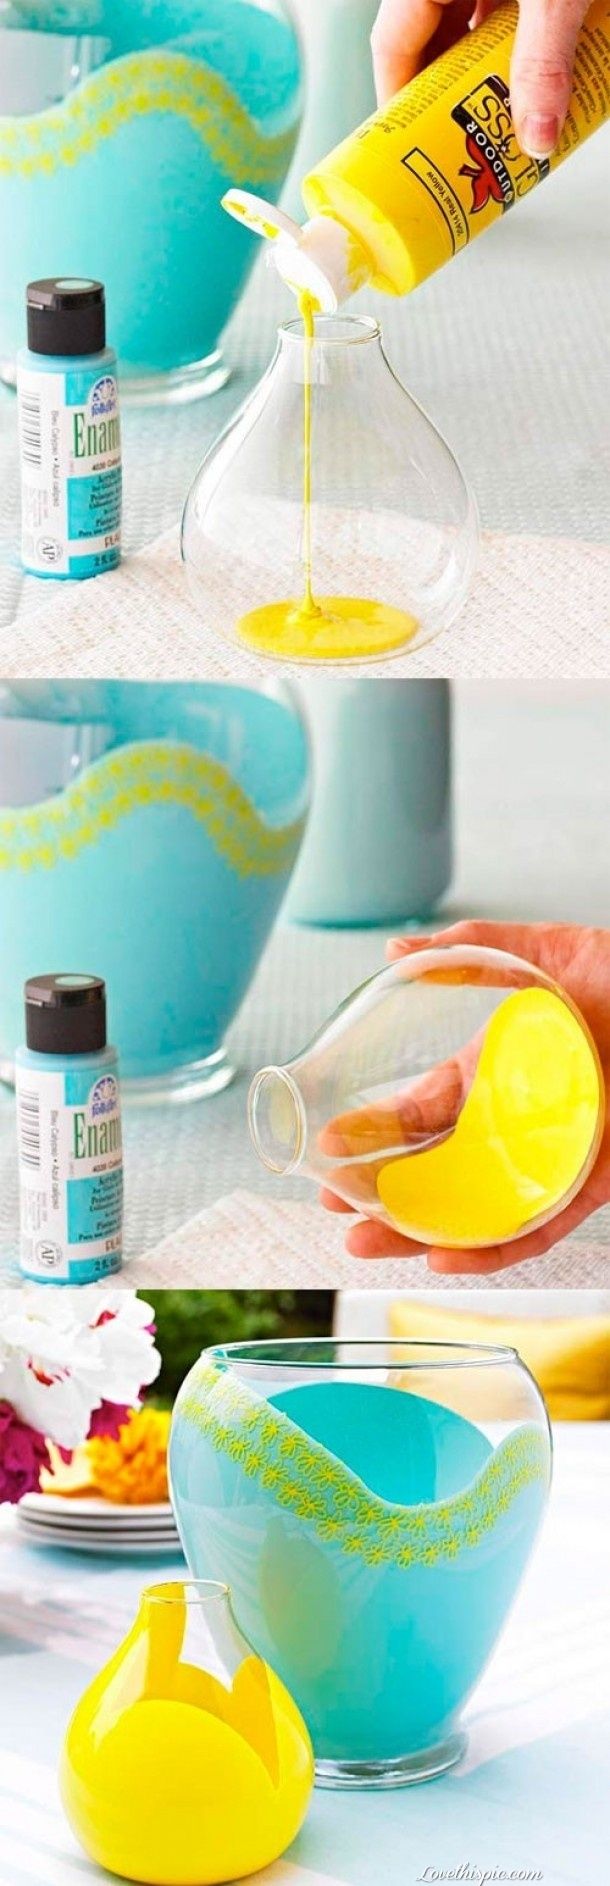 21 Great DIY Tutorials for Home Decoration  (1)